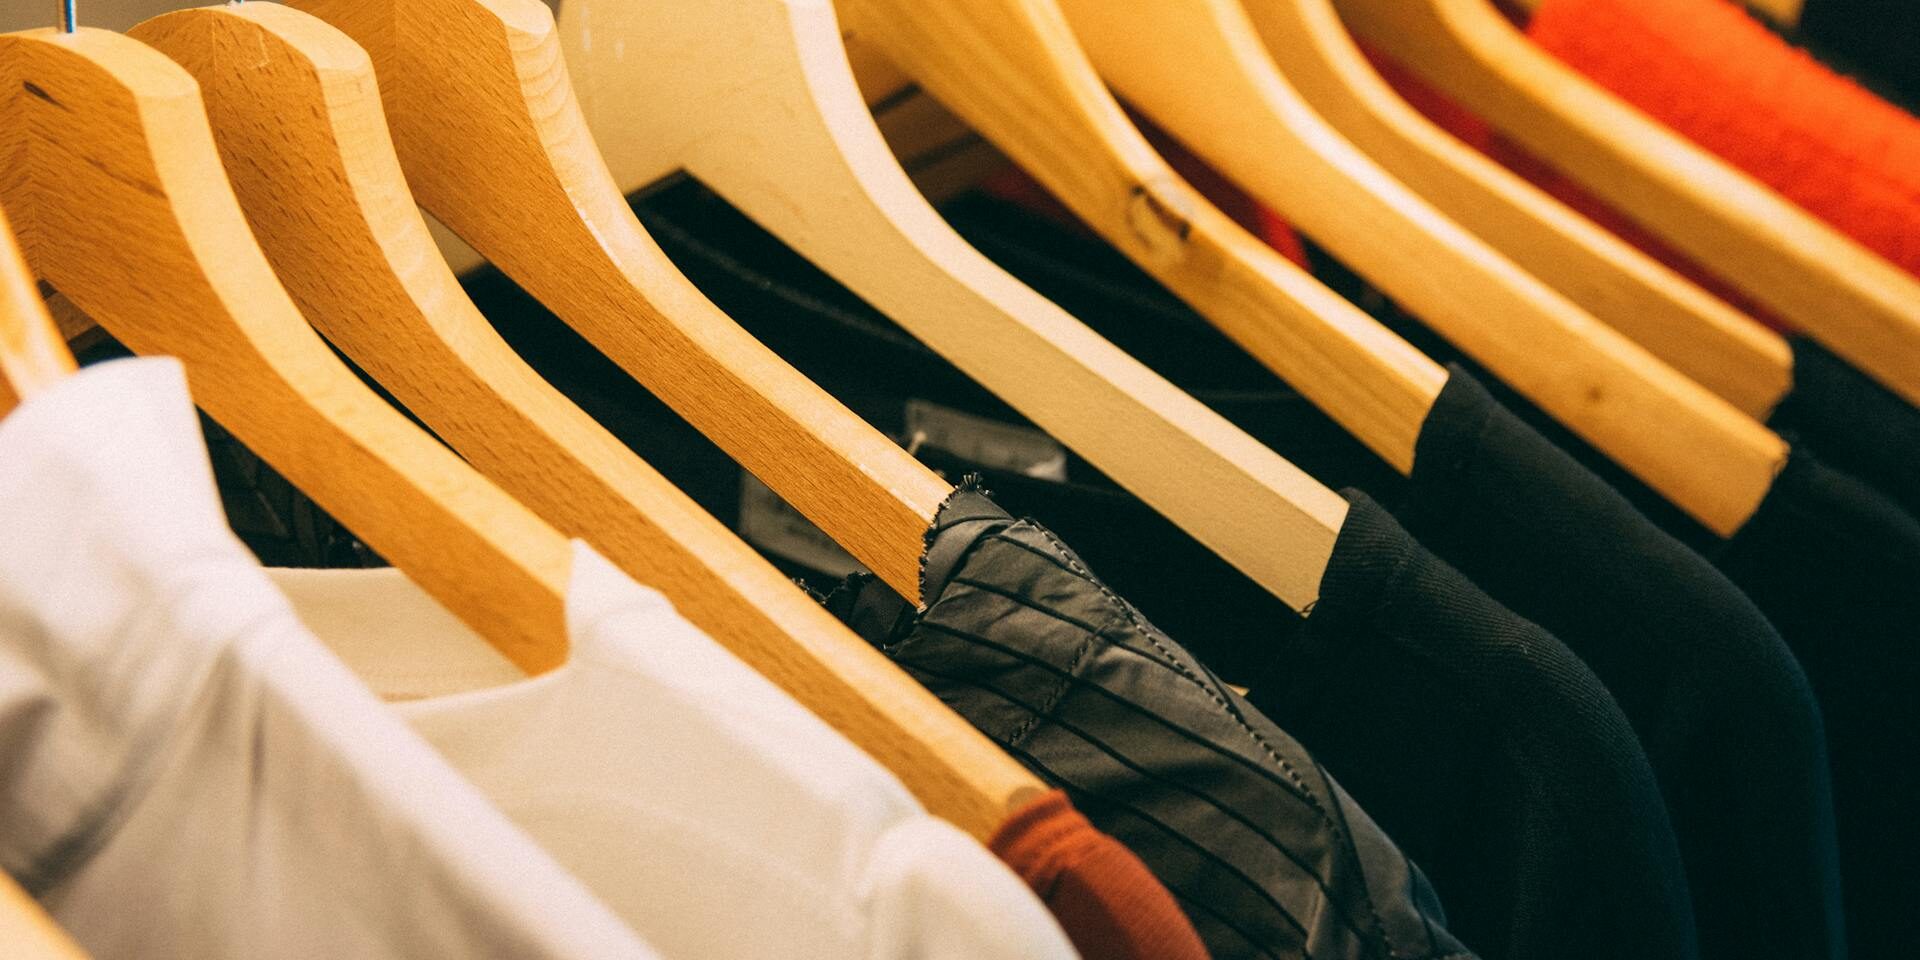 35 clothing business ideas